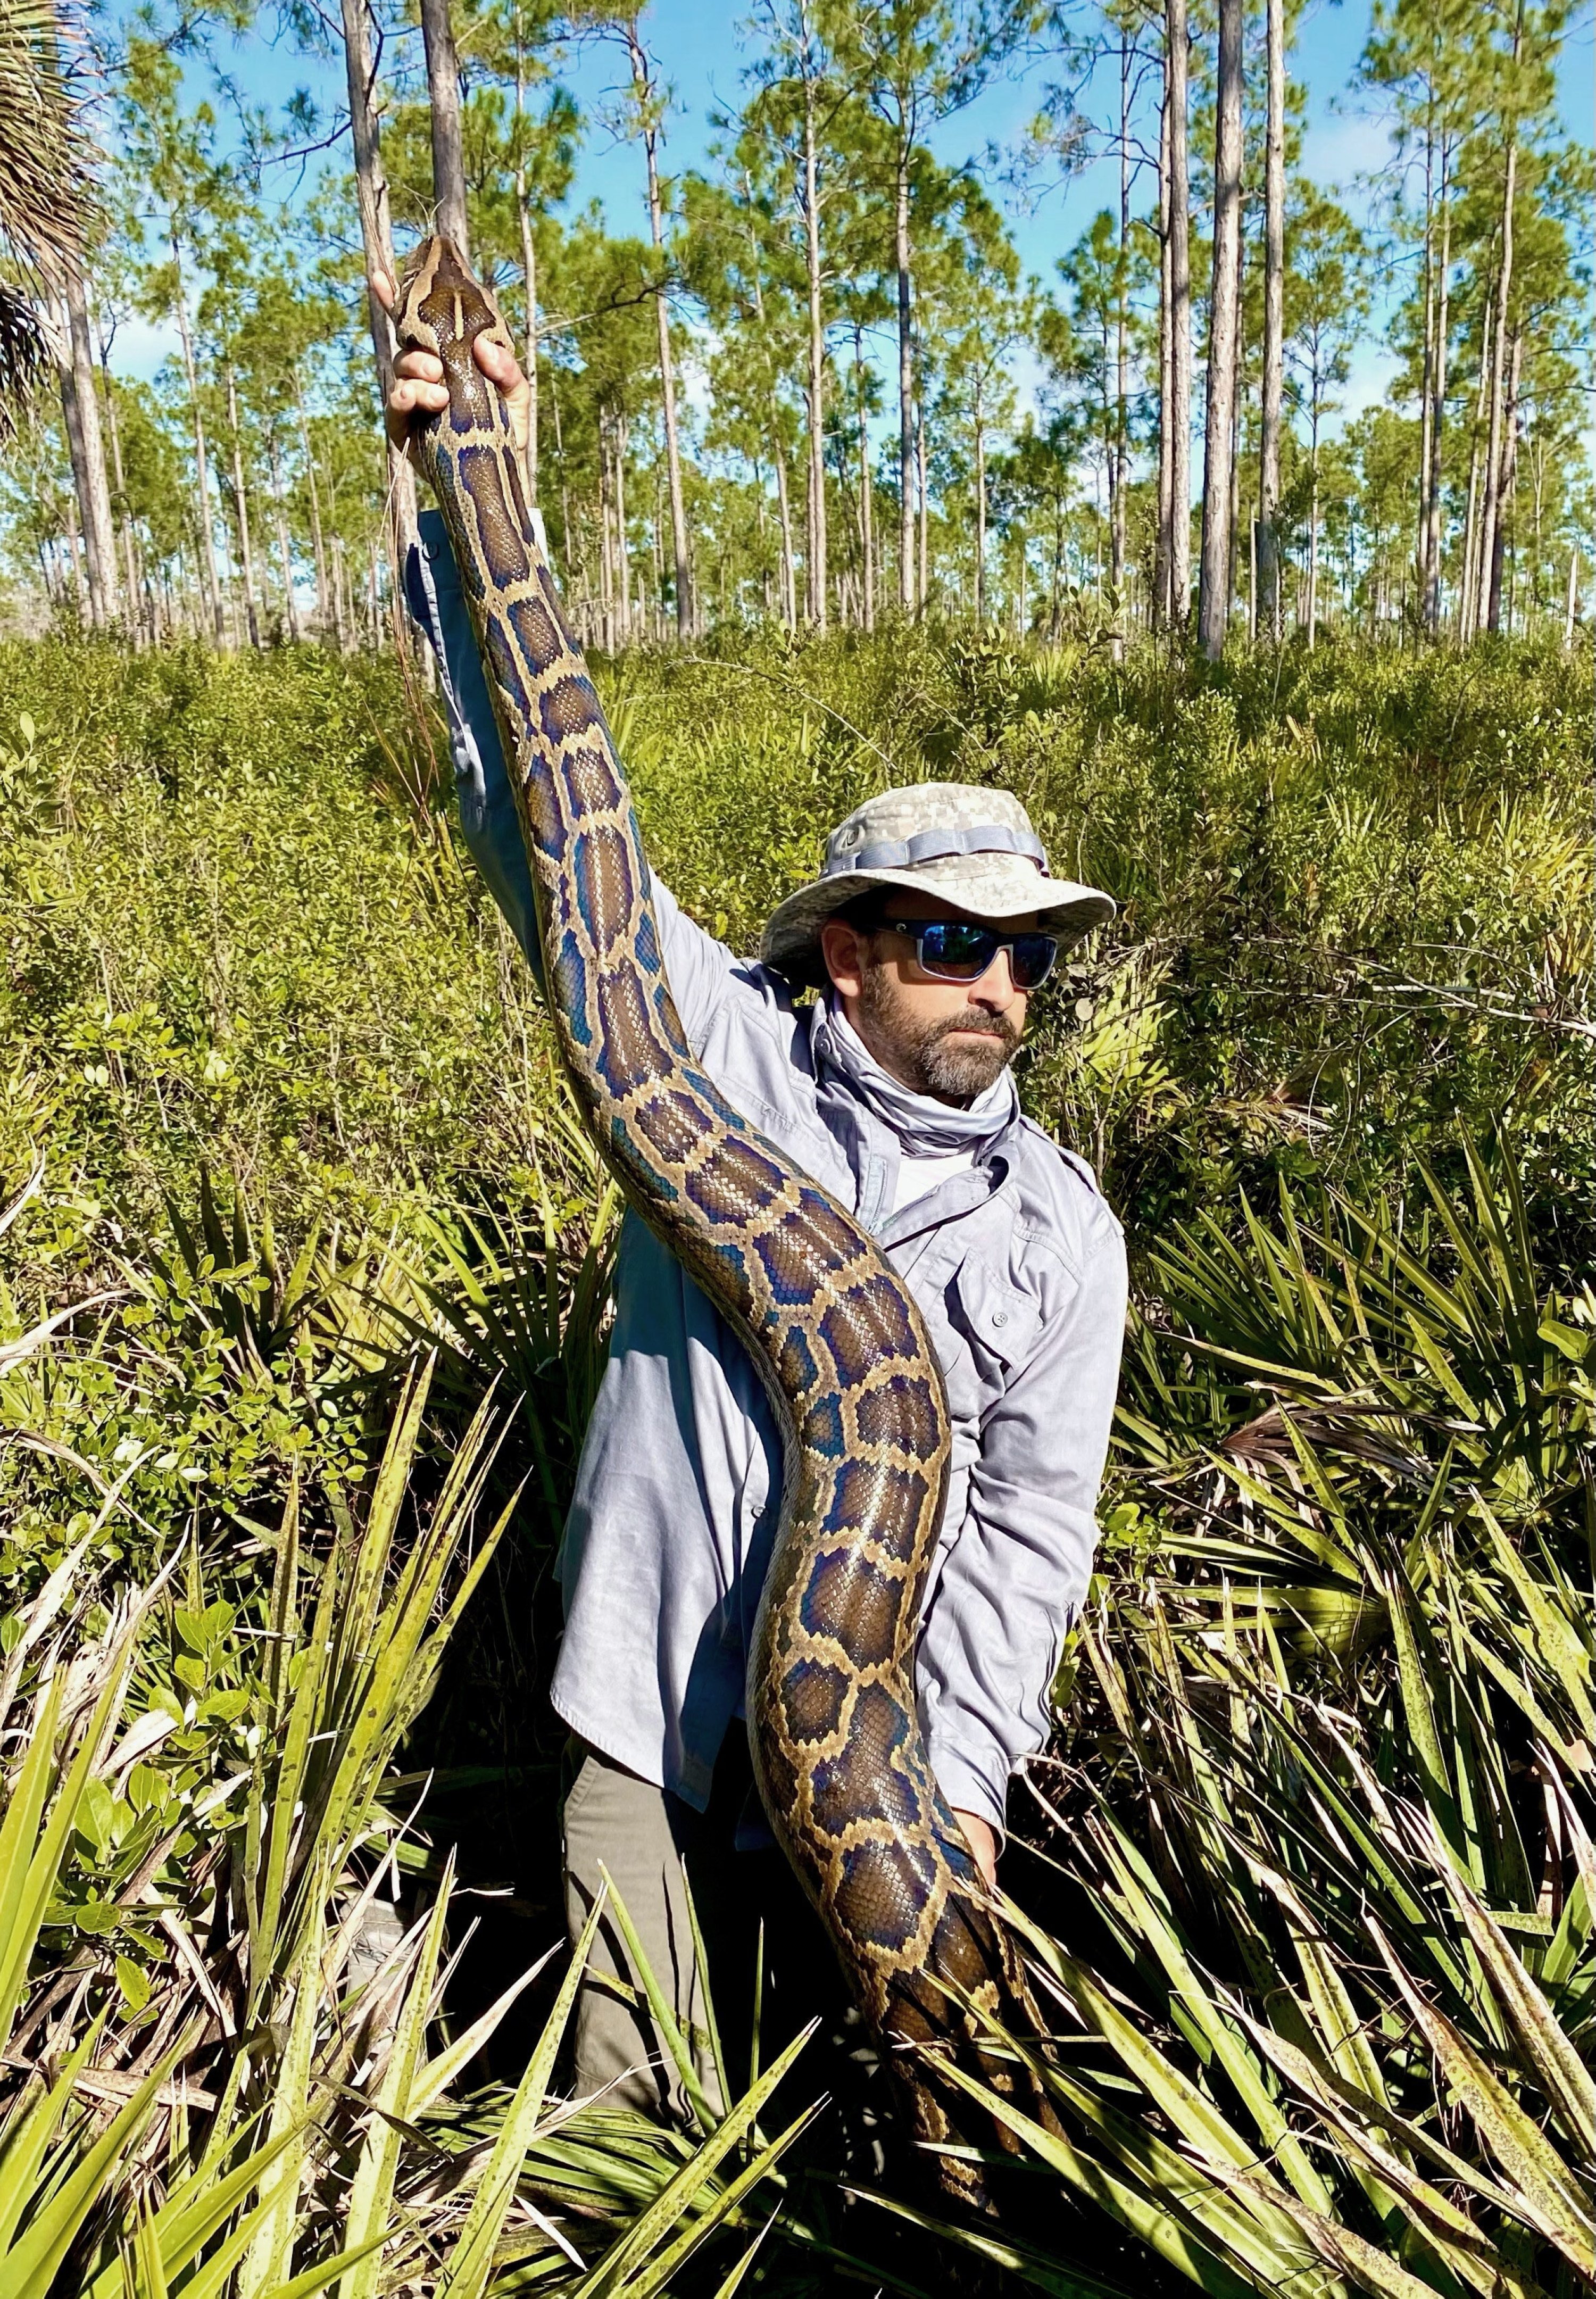 This photo provided by the Conservancy of Southwest Florida shows biologist Ian Bartoszek with a 15-foot female Burmese python captured by tracking a male scout snake in Picayune Strand State Forest, Florida, US, June 22, 2022. (AP Photo)